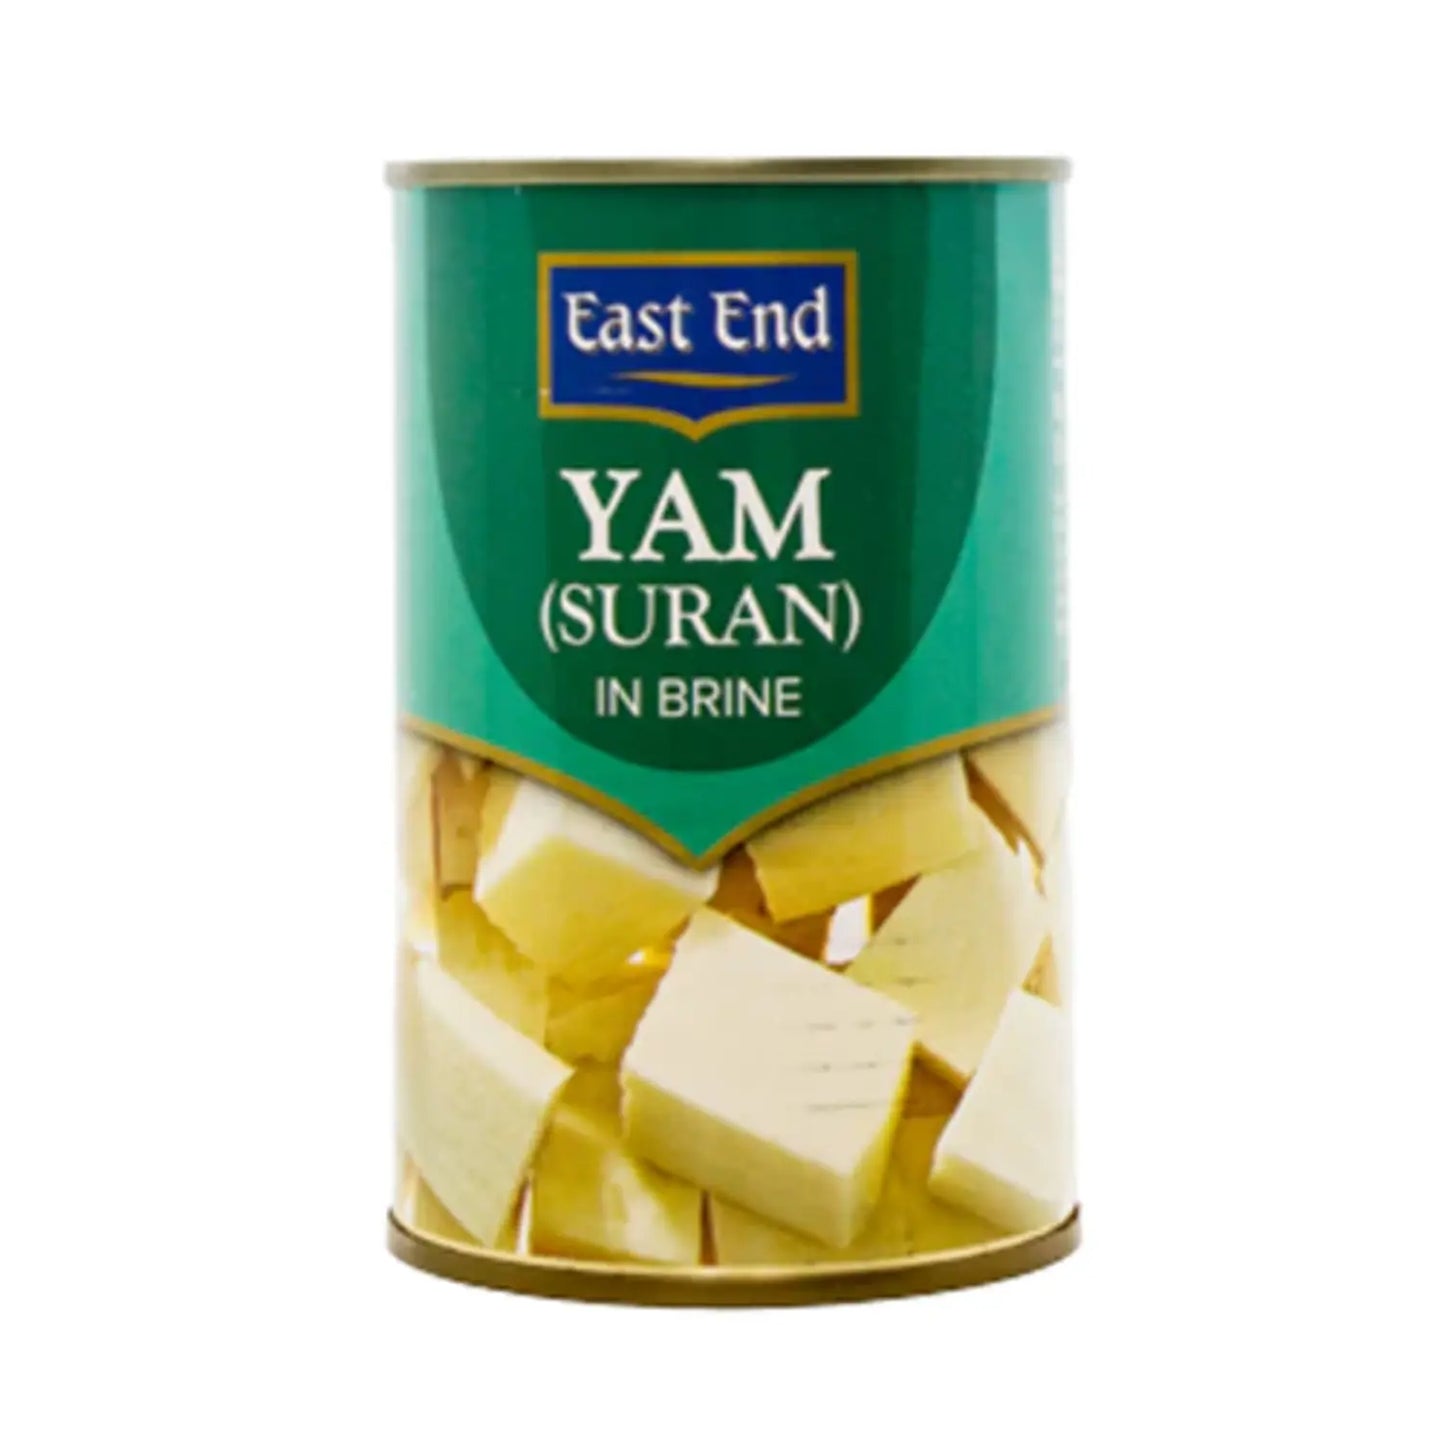 East End Yam (Suran) 400g